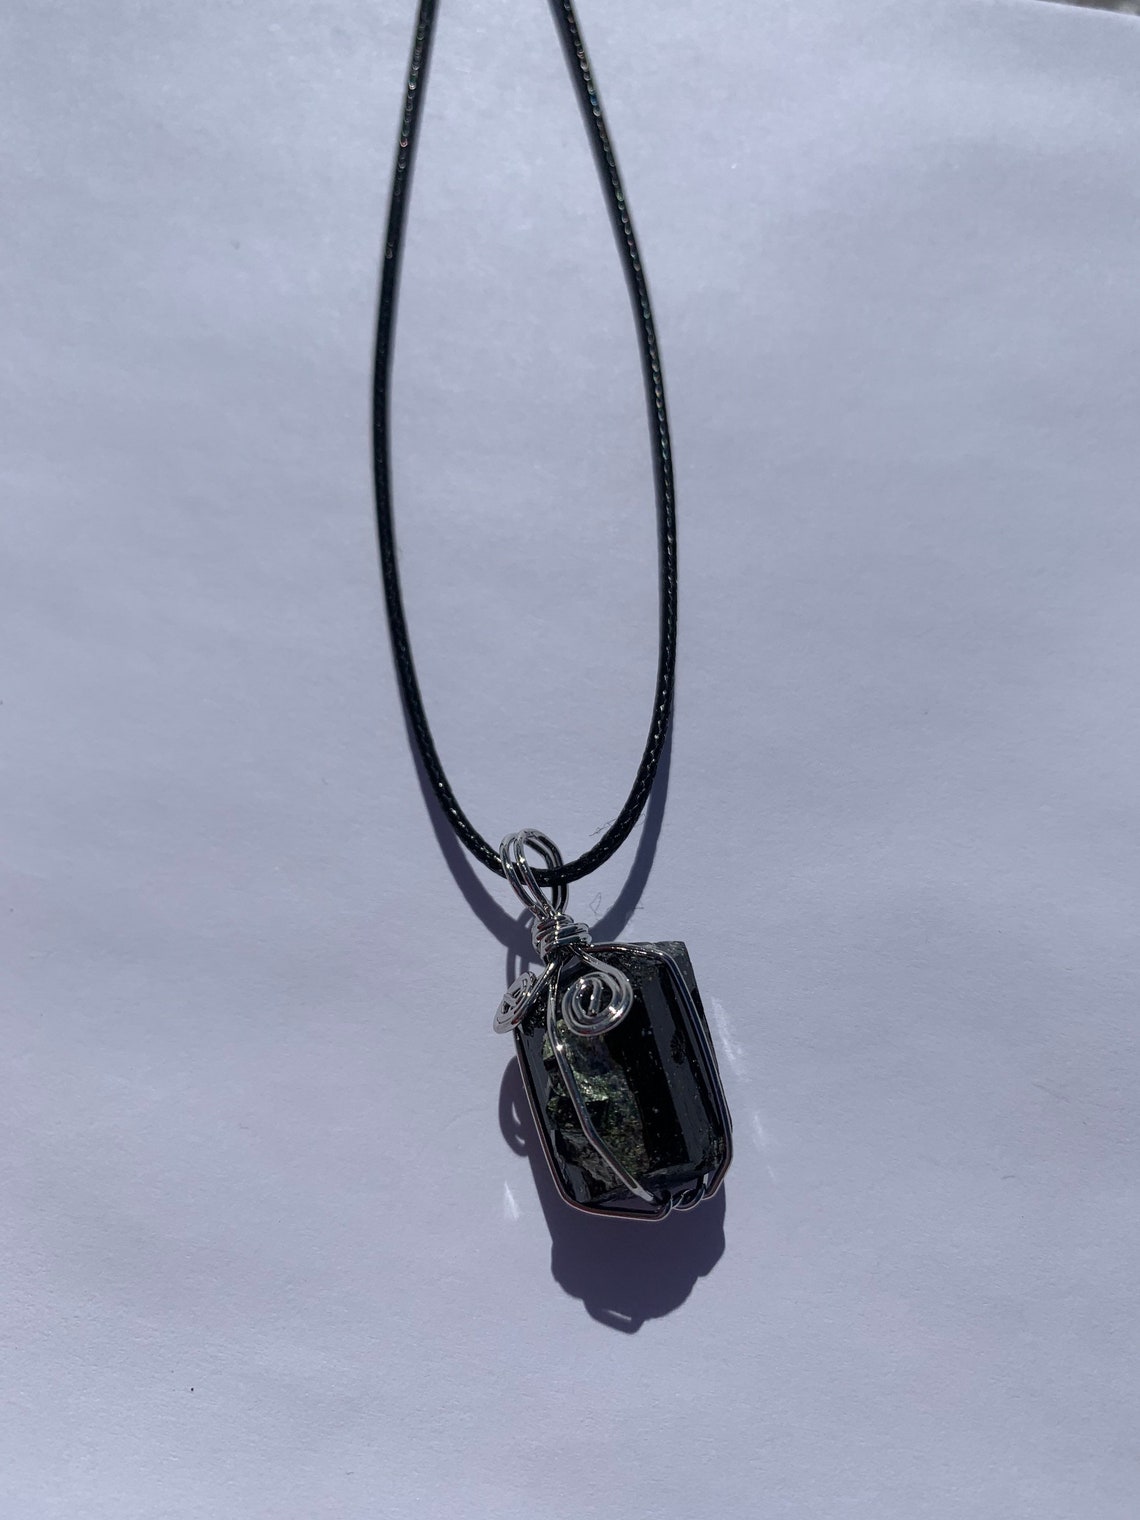 Buy Black Tourmaline Necklace Crystal Healing Online in India - Etsy